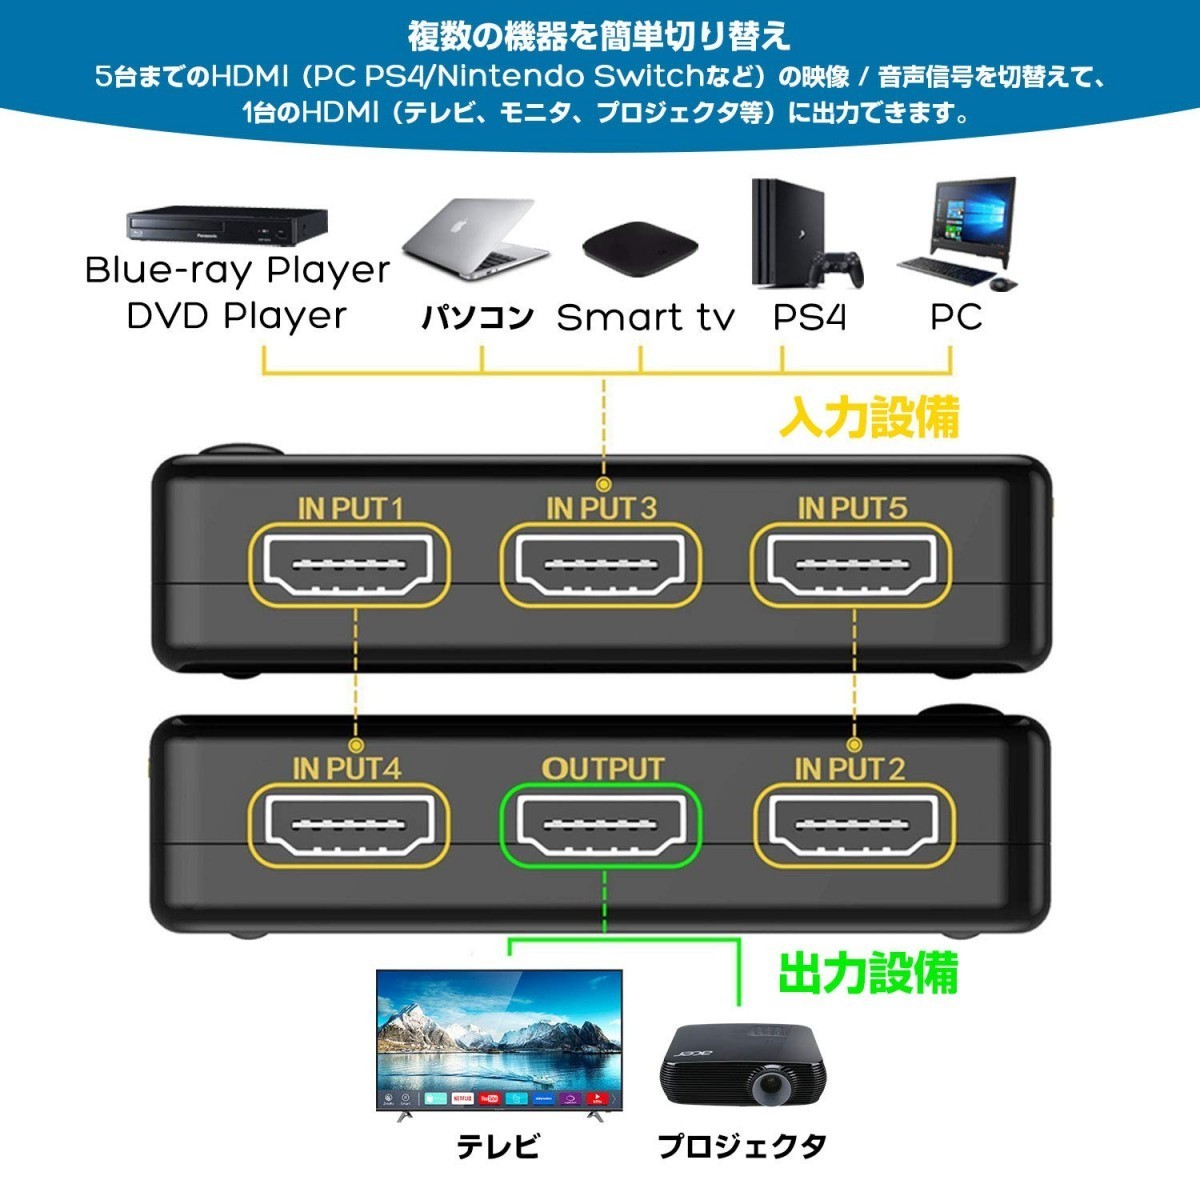 HDMI selector 5 input 1 output HDMI distributor automatic manual switch USB supply of electricity remote control attaching 4K?3D PS4,Nintendo Switch, etc. correspondence 